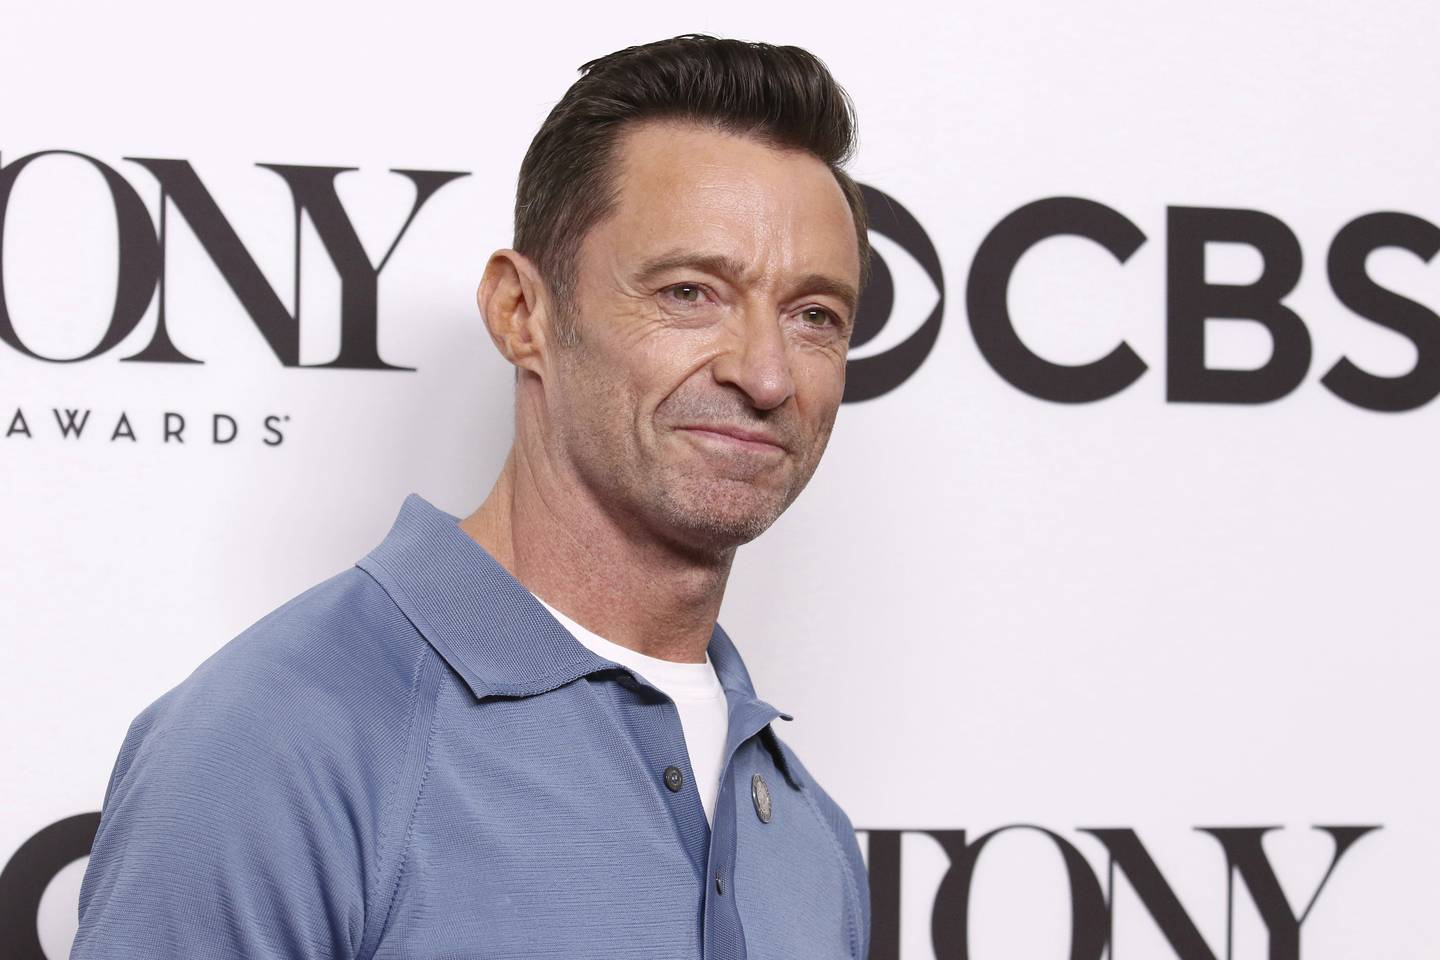 Hugh Jackman is thought to have a net worth of $180 million, according to Celebrity Net Worth. AP